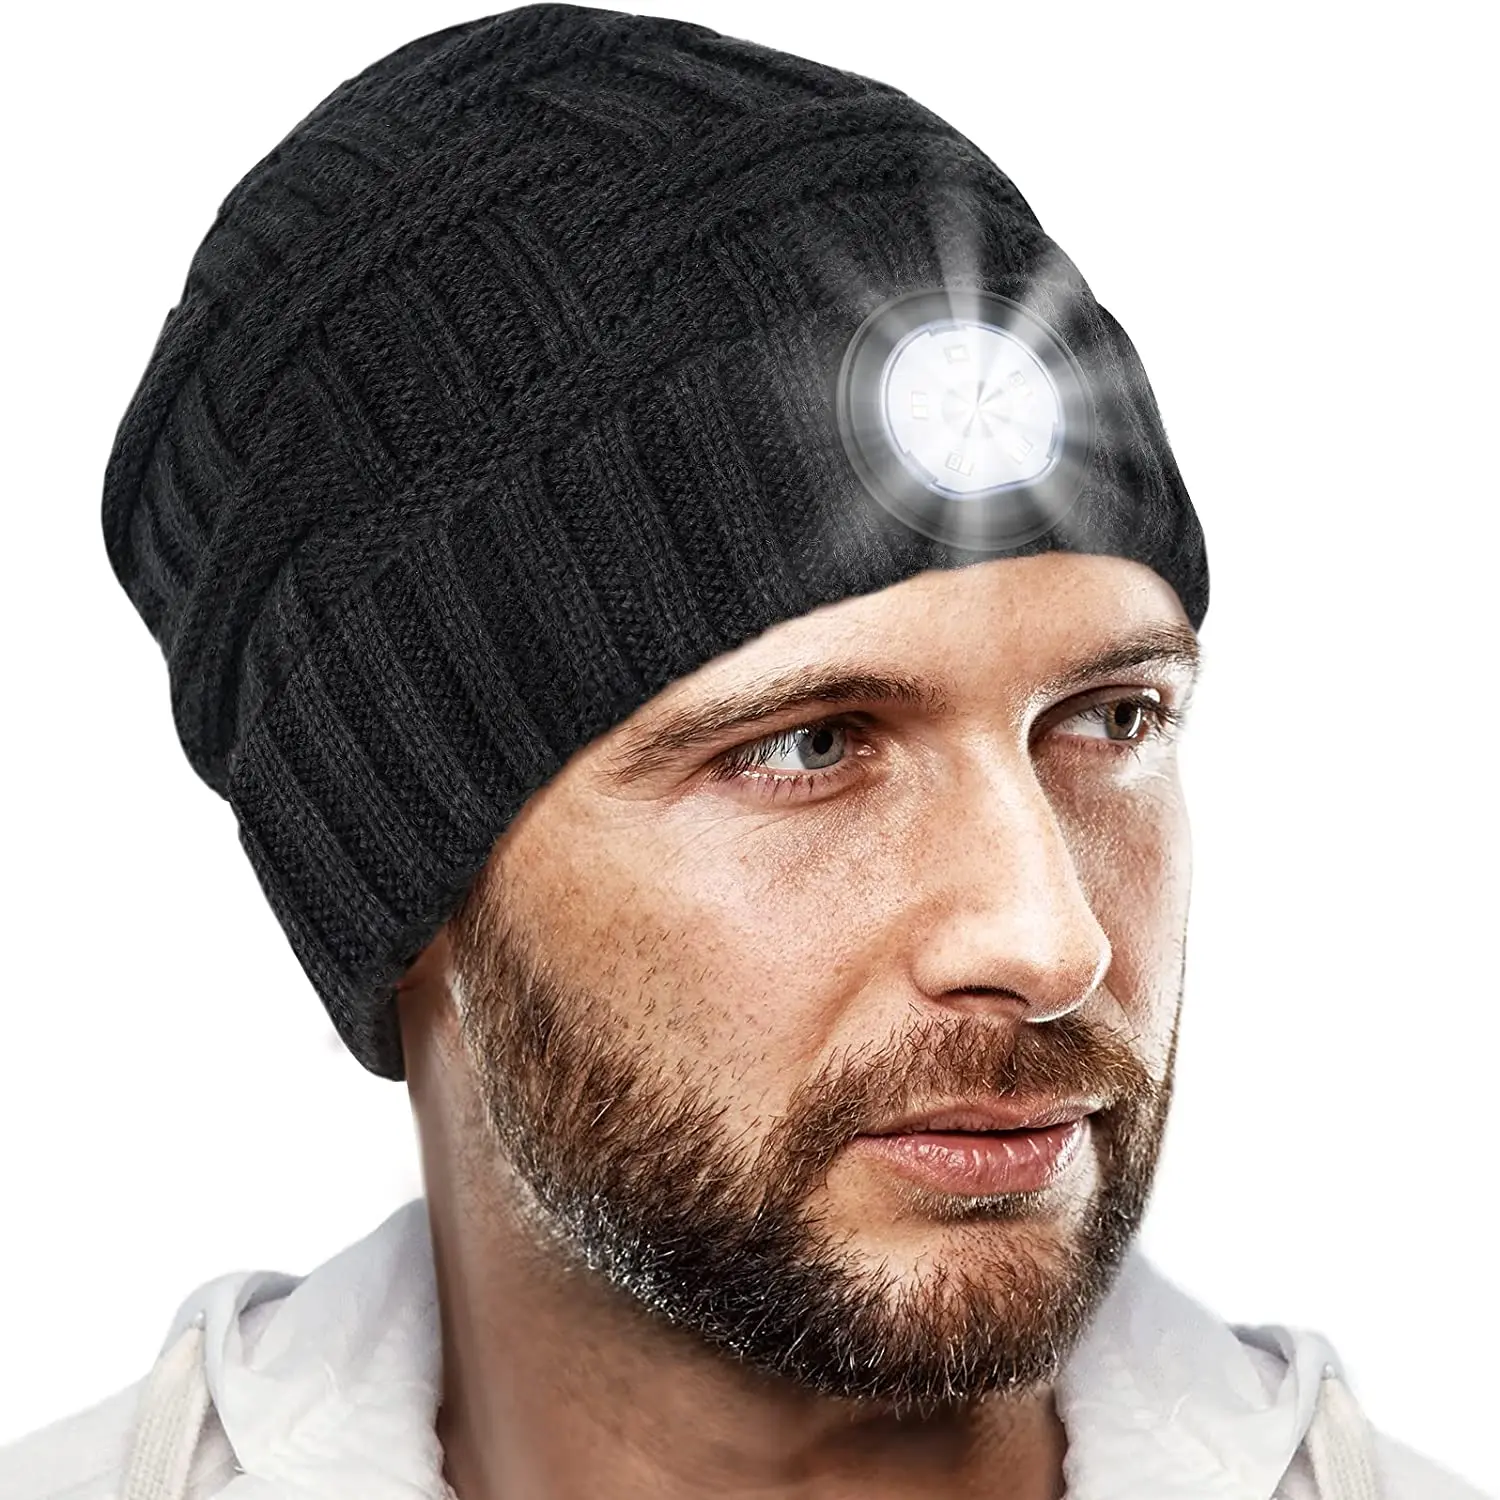 

LED Beanie with Handsfree Lights for Night Running Camping Walking Soft Warm Knit Hat with Rechargeable Headlamp Great Gifts